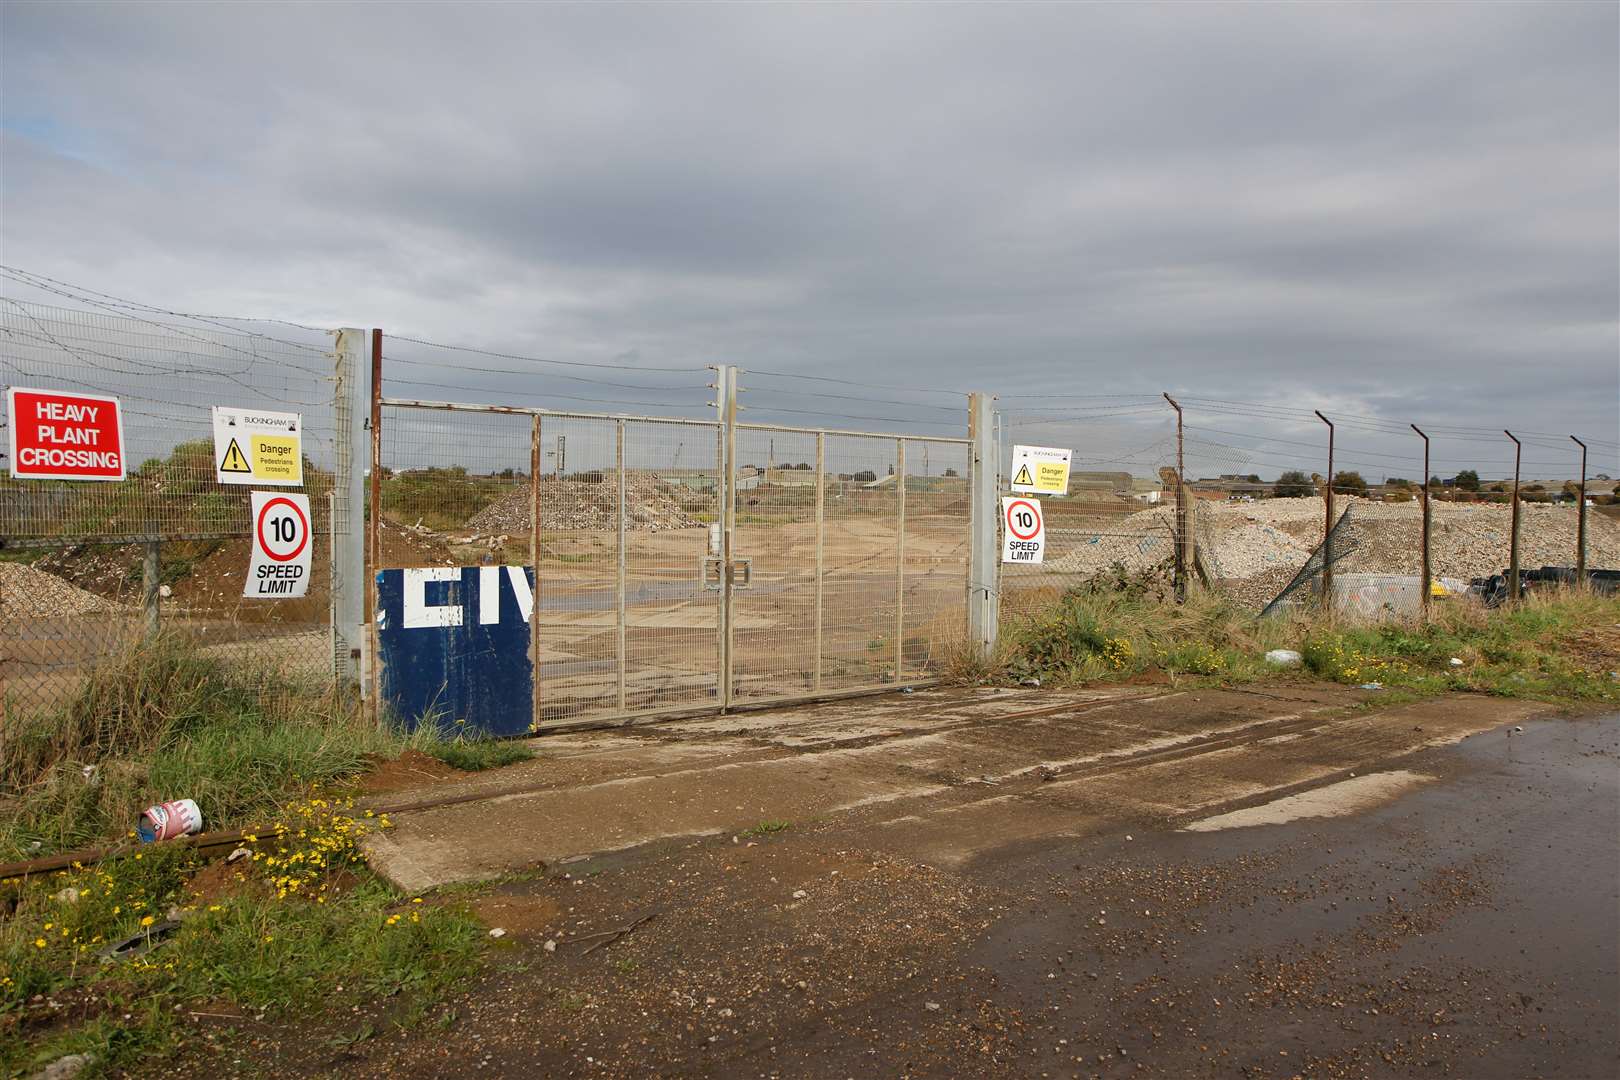 How the derelict site at Rushenden looked.